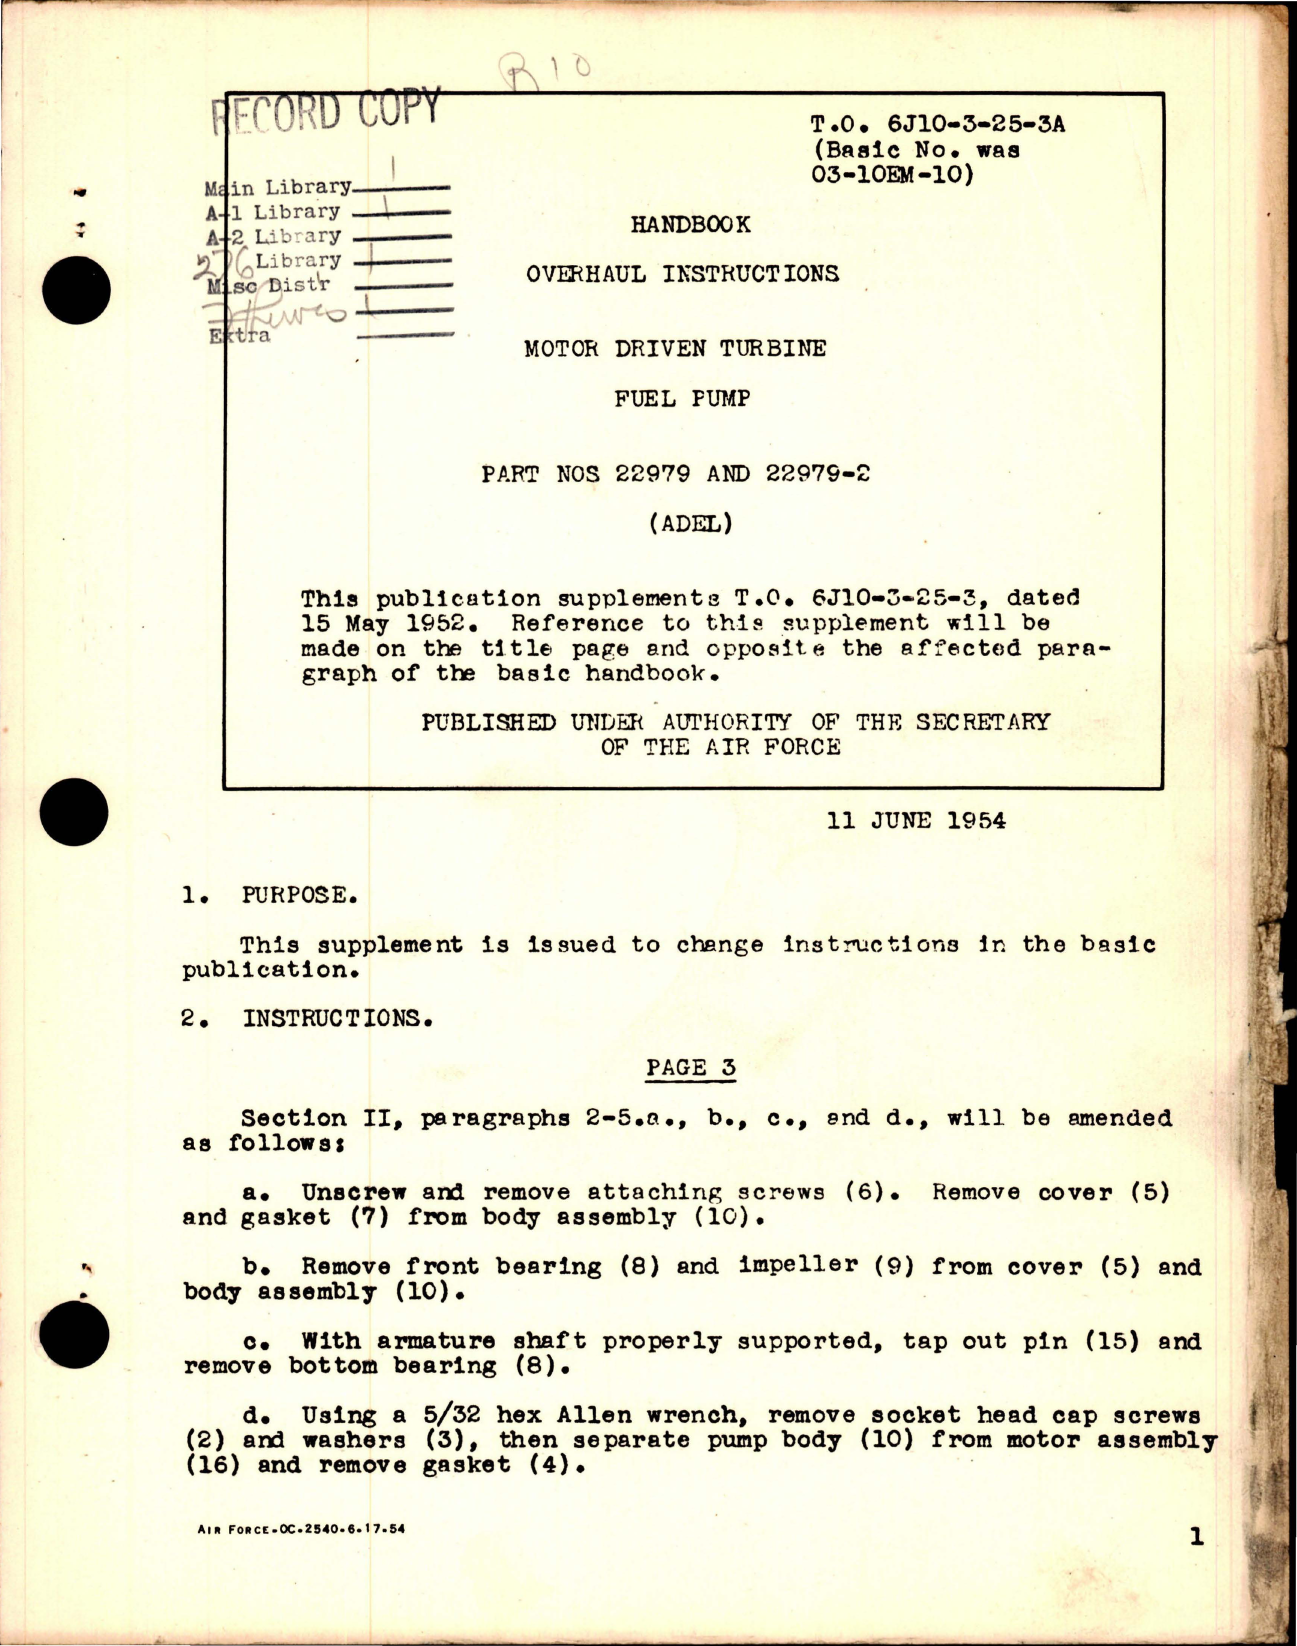 Sample page 1 from AirCorps Library document: Supplement to Overhaul Instructions for Motor Driven Turbine Fuel Pump - Part 22979 and 22979-2